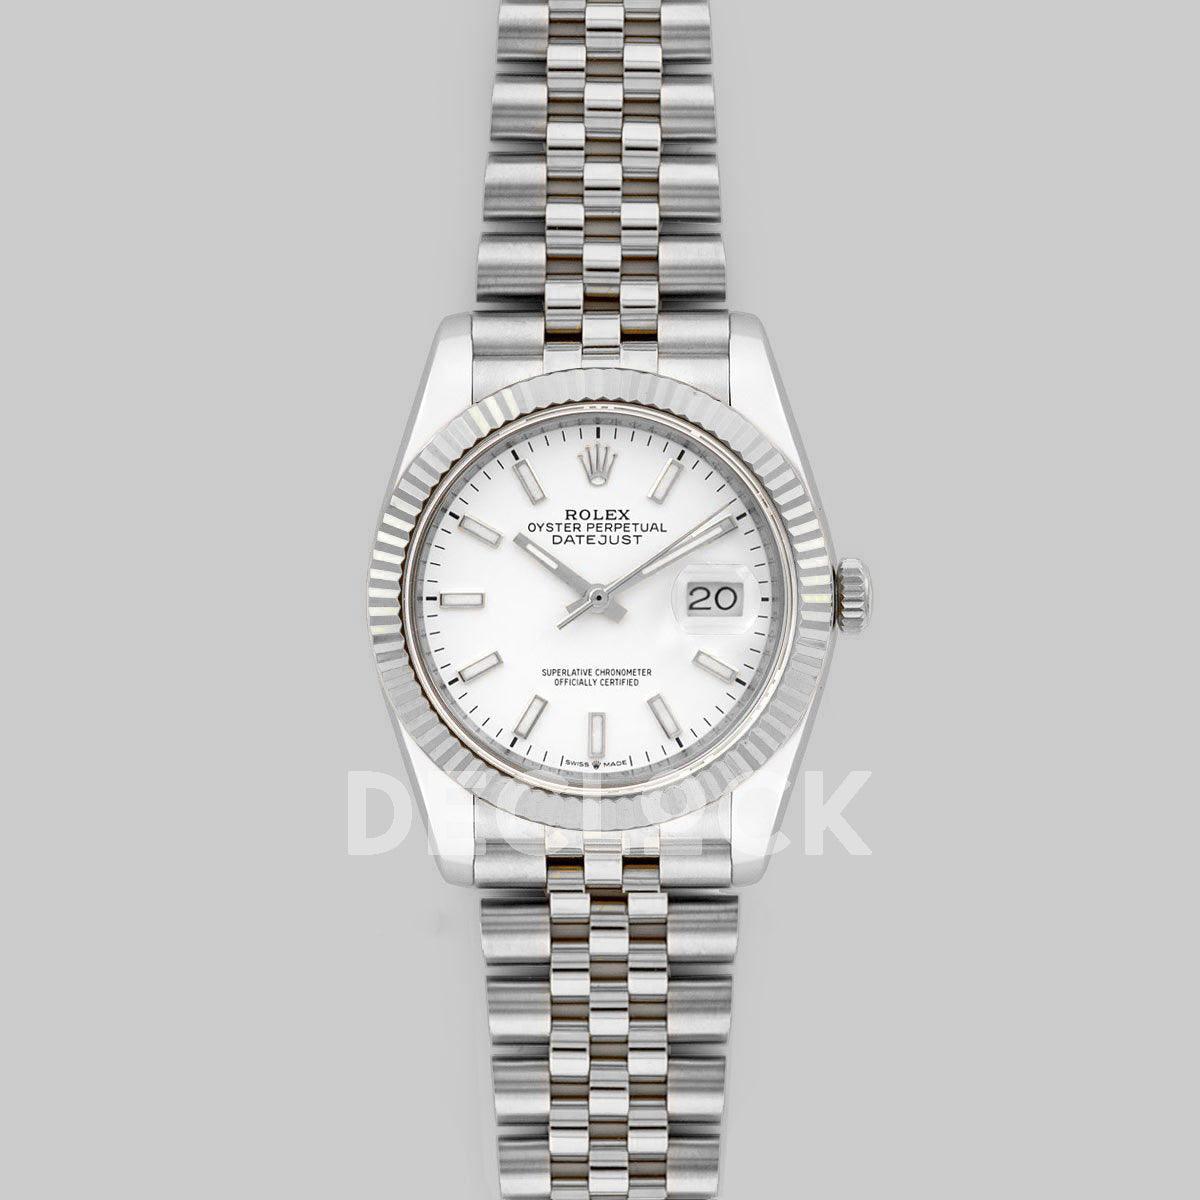 Replica Rolex Datejust 36 116234 White Dial with Stick Markers - Replica Watches